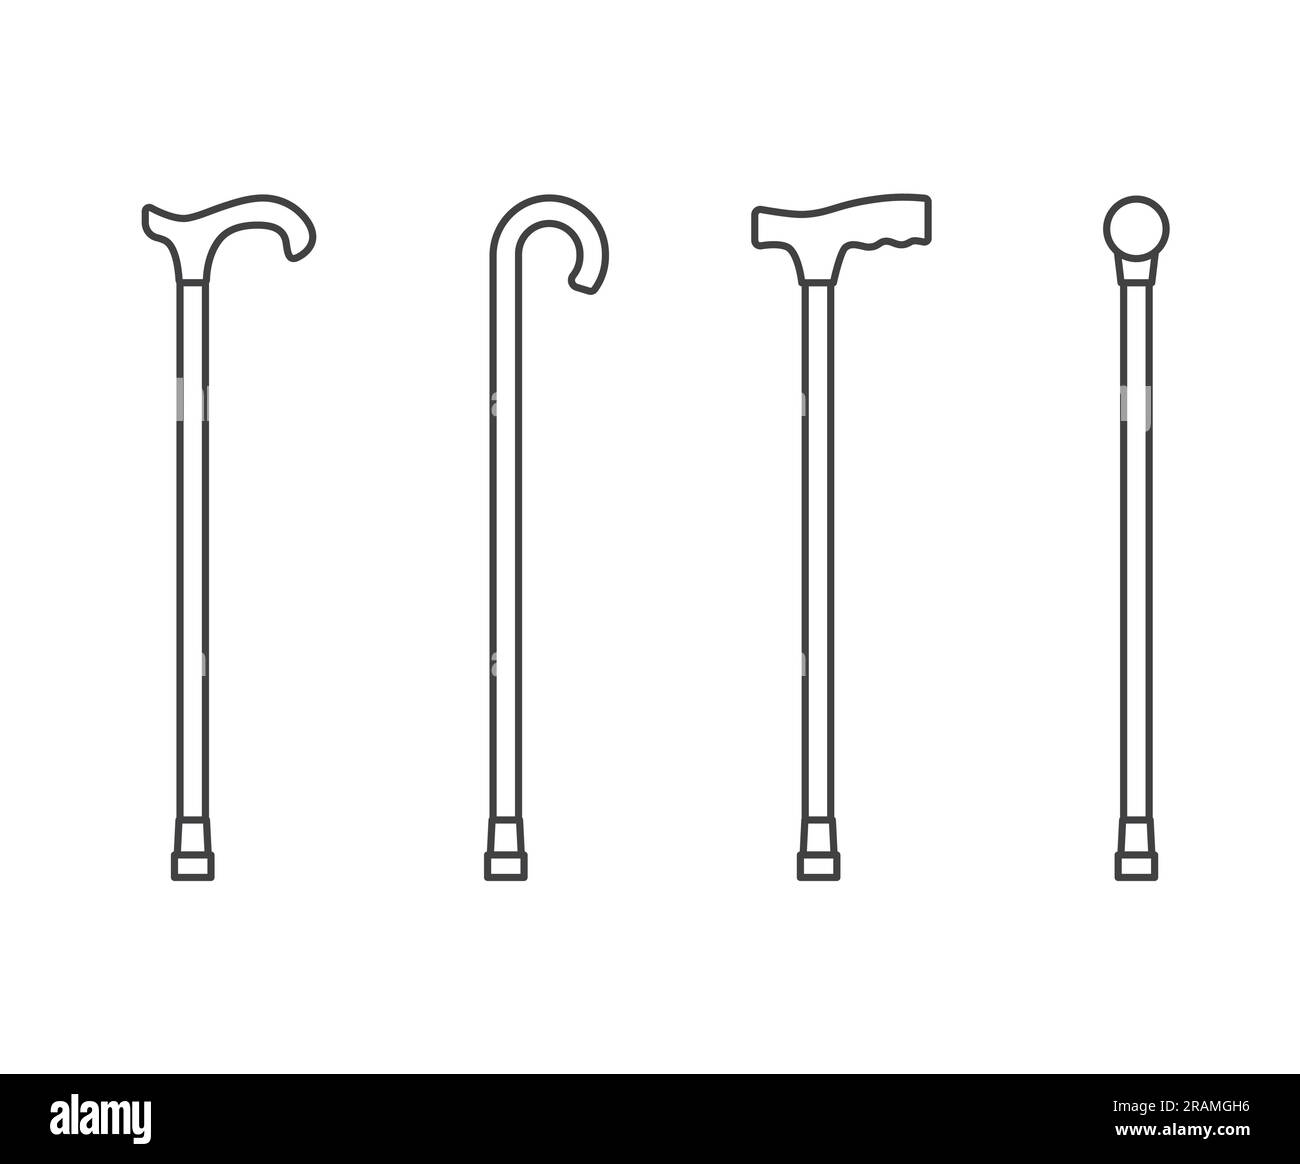 walking sticks and canes set -vector illustration Stock Vector